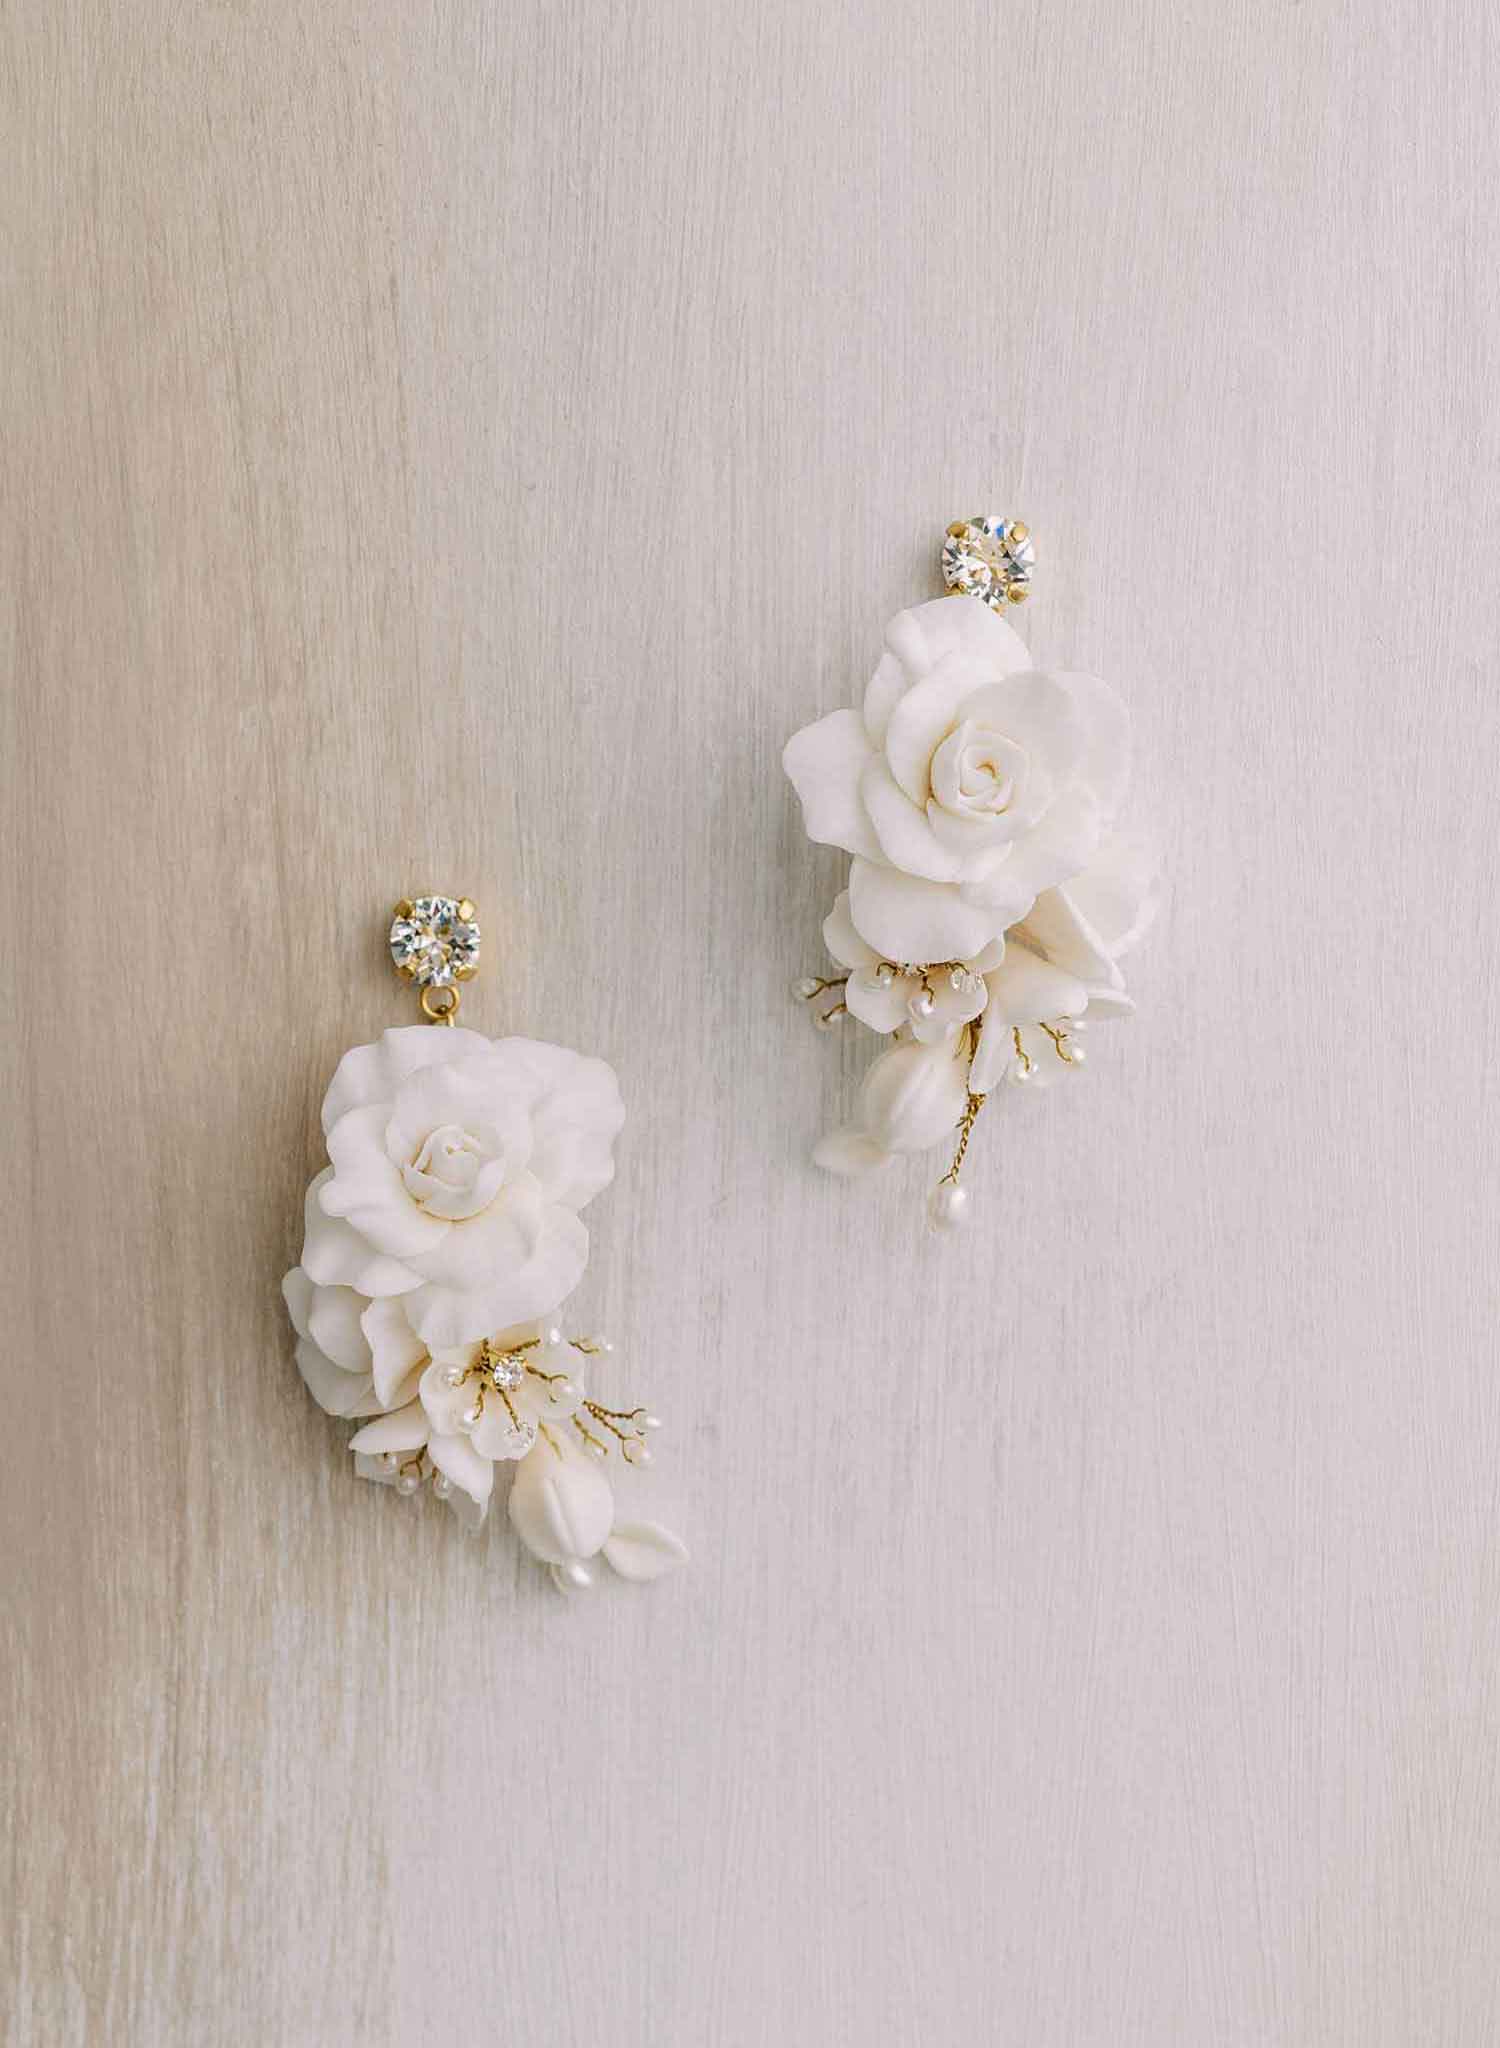 Rose and crystal drop earrings - Style #2105